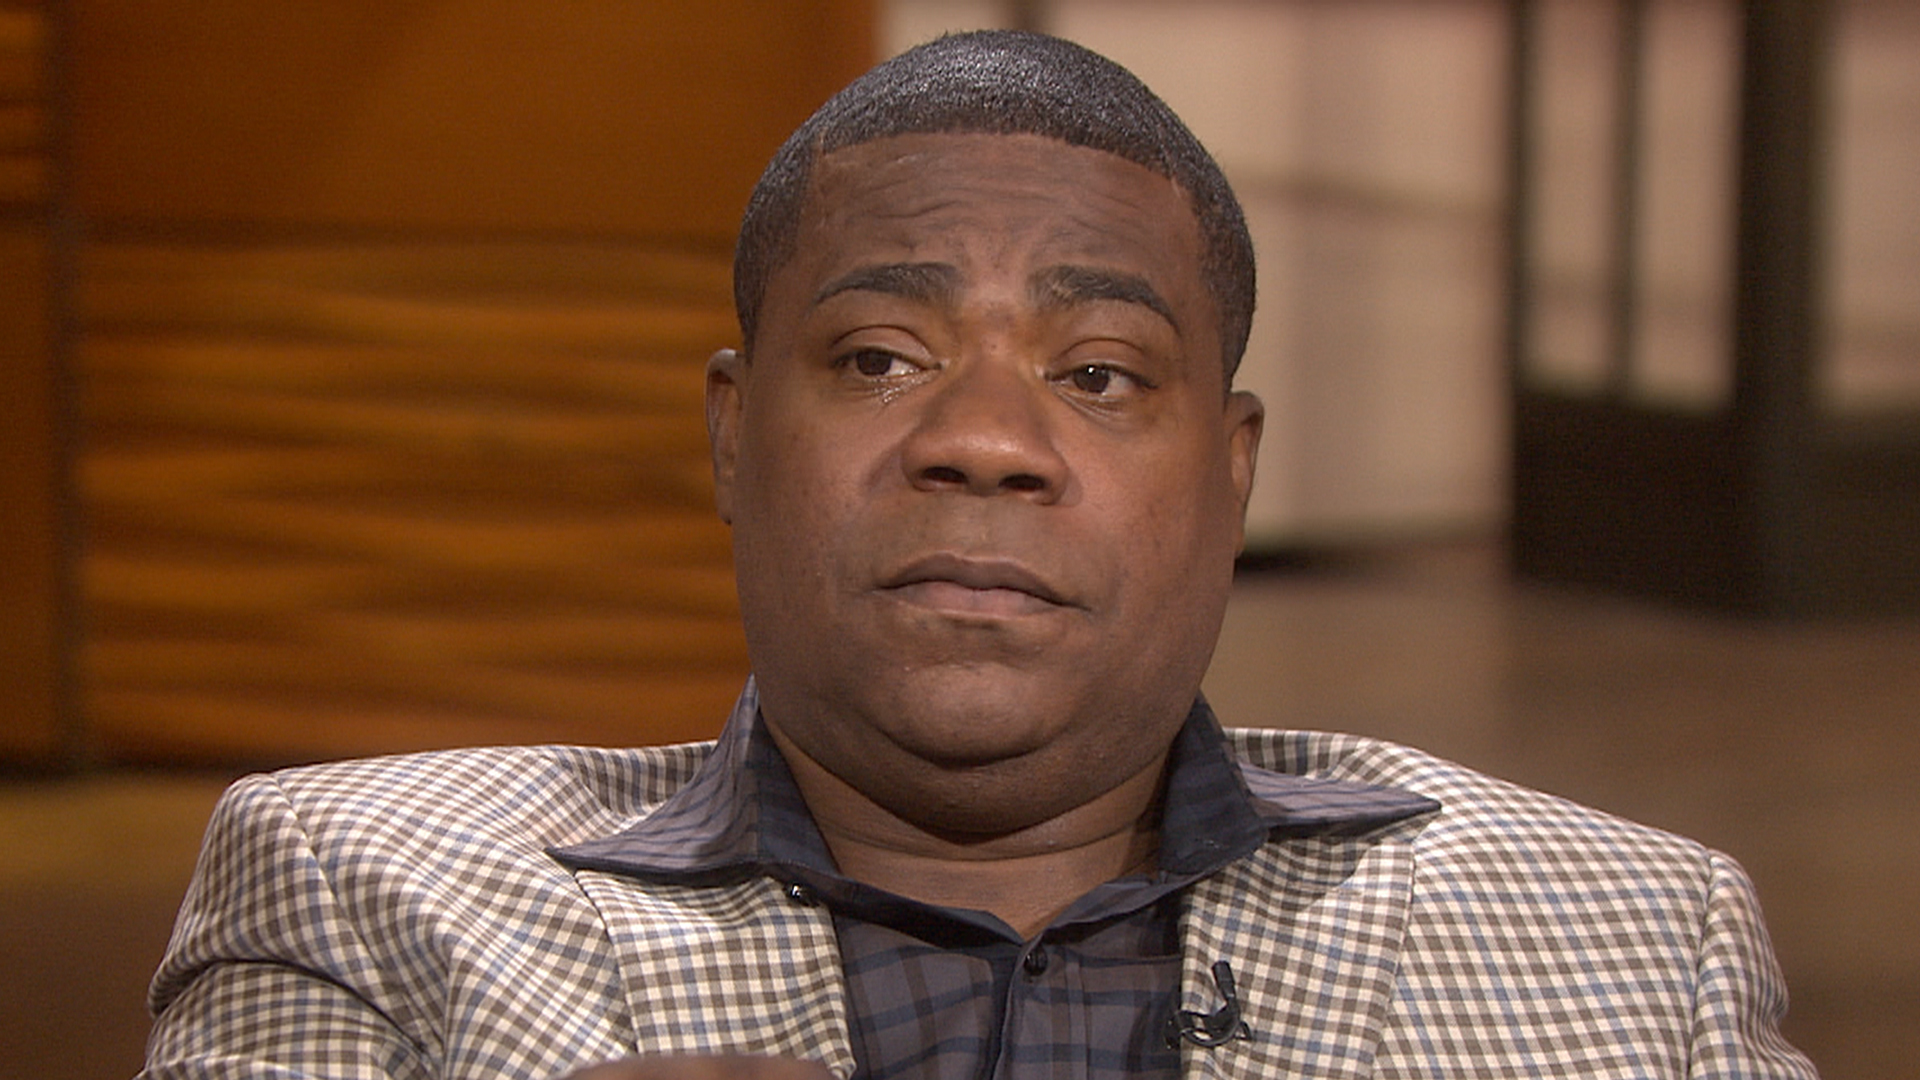 Tracy Morgan speaks on TODAY Show to Matt Lauer in first interview since crash